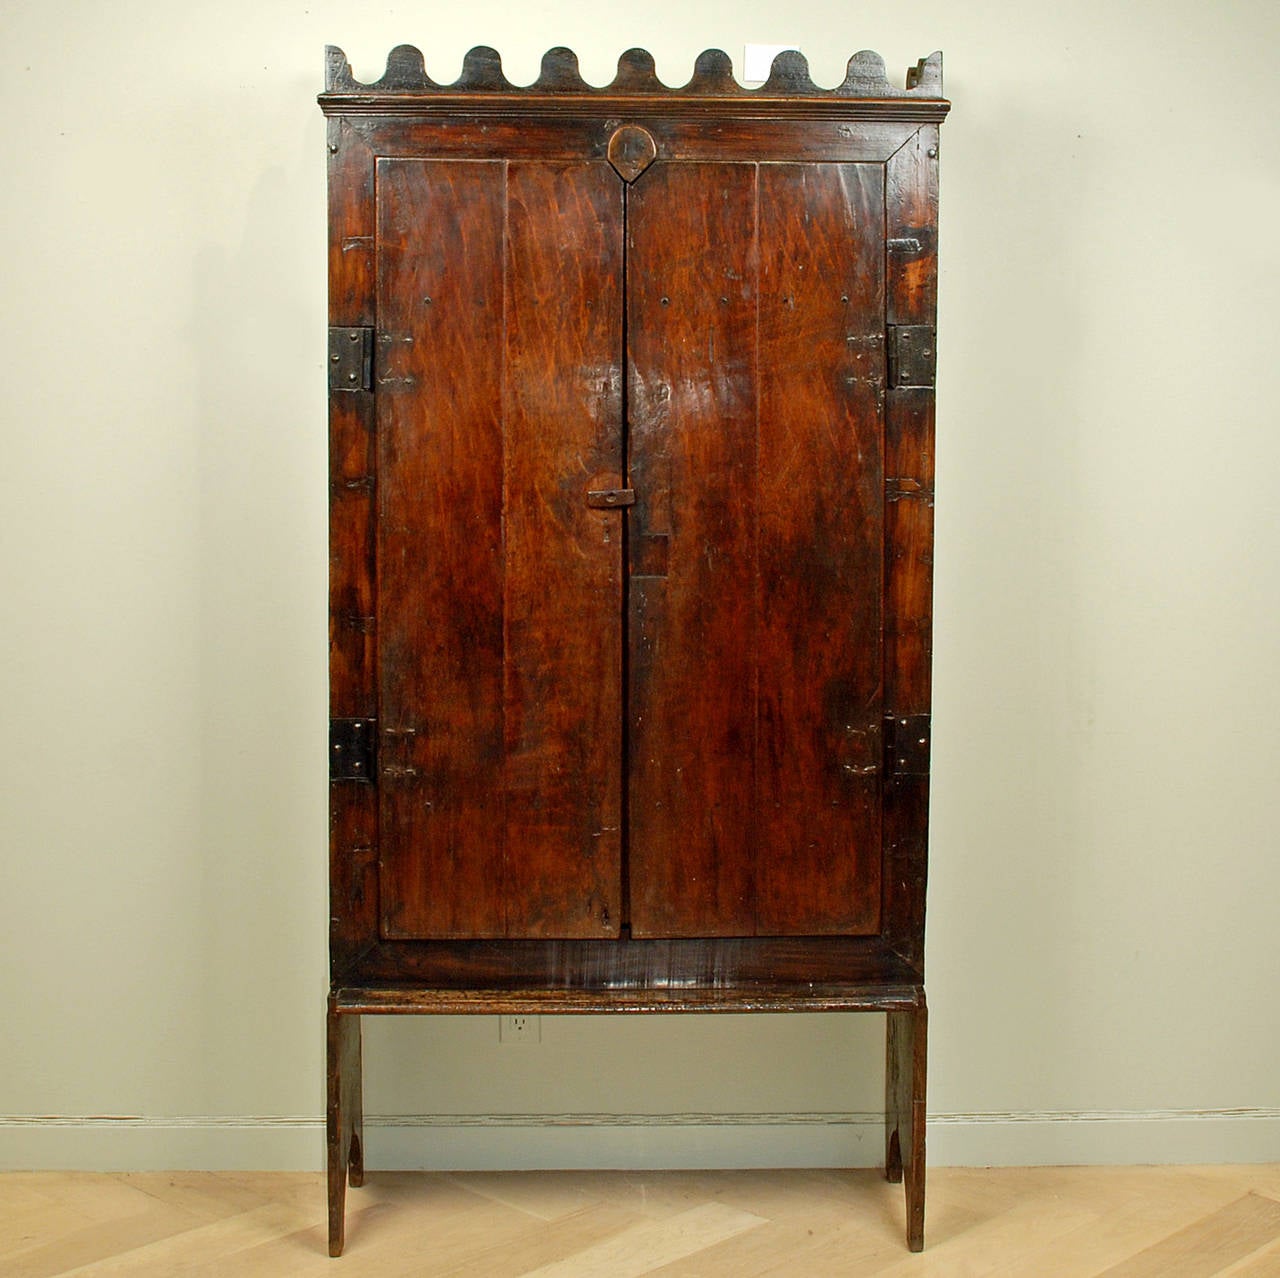 A very rare late 18th / early 19th century Portuguese / Brazilian trastero (pantry cabinet) with scalloped cornice over two doors, all raised on block feet. Rich and lustrous Brazilian jacaranda wood (Brazilian rosewood) with original iron hinges